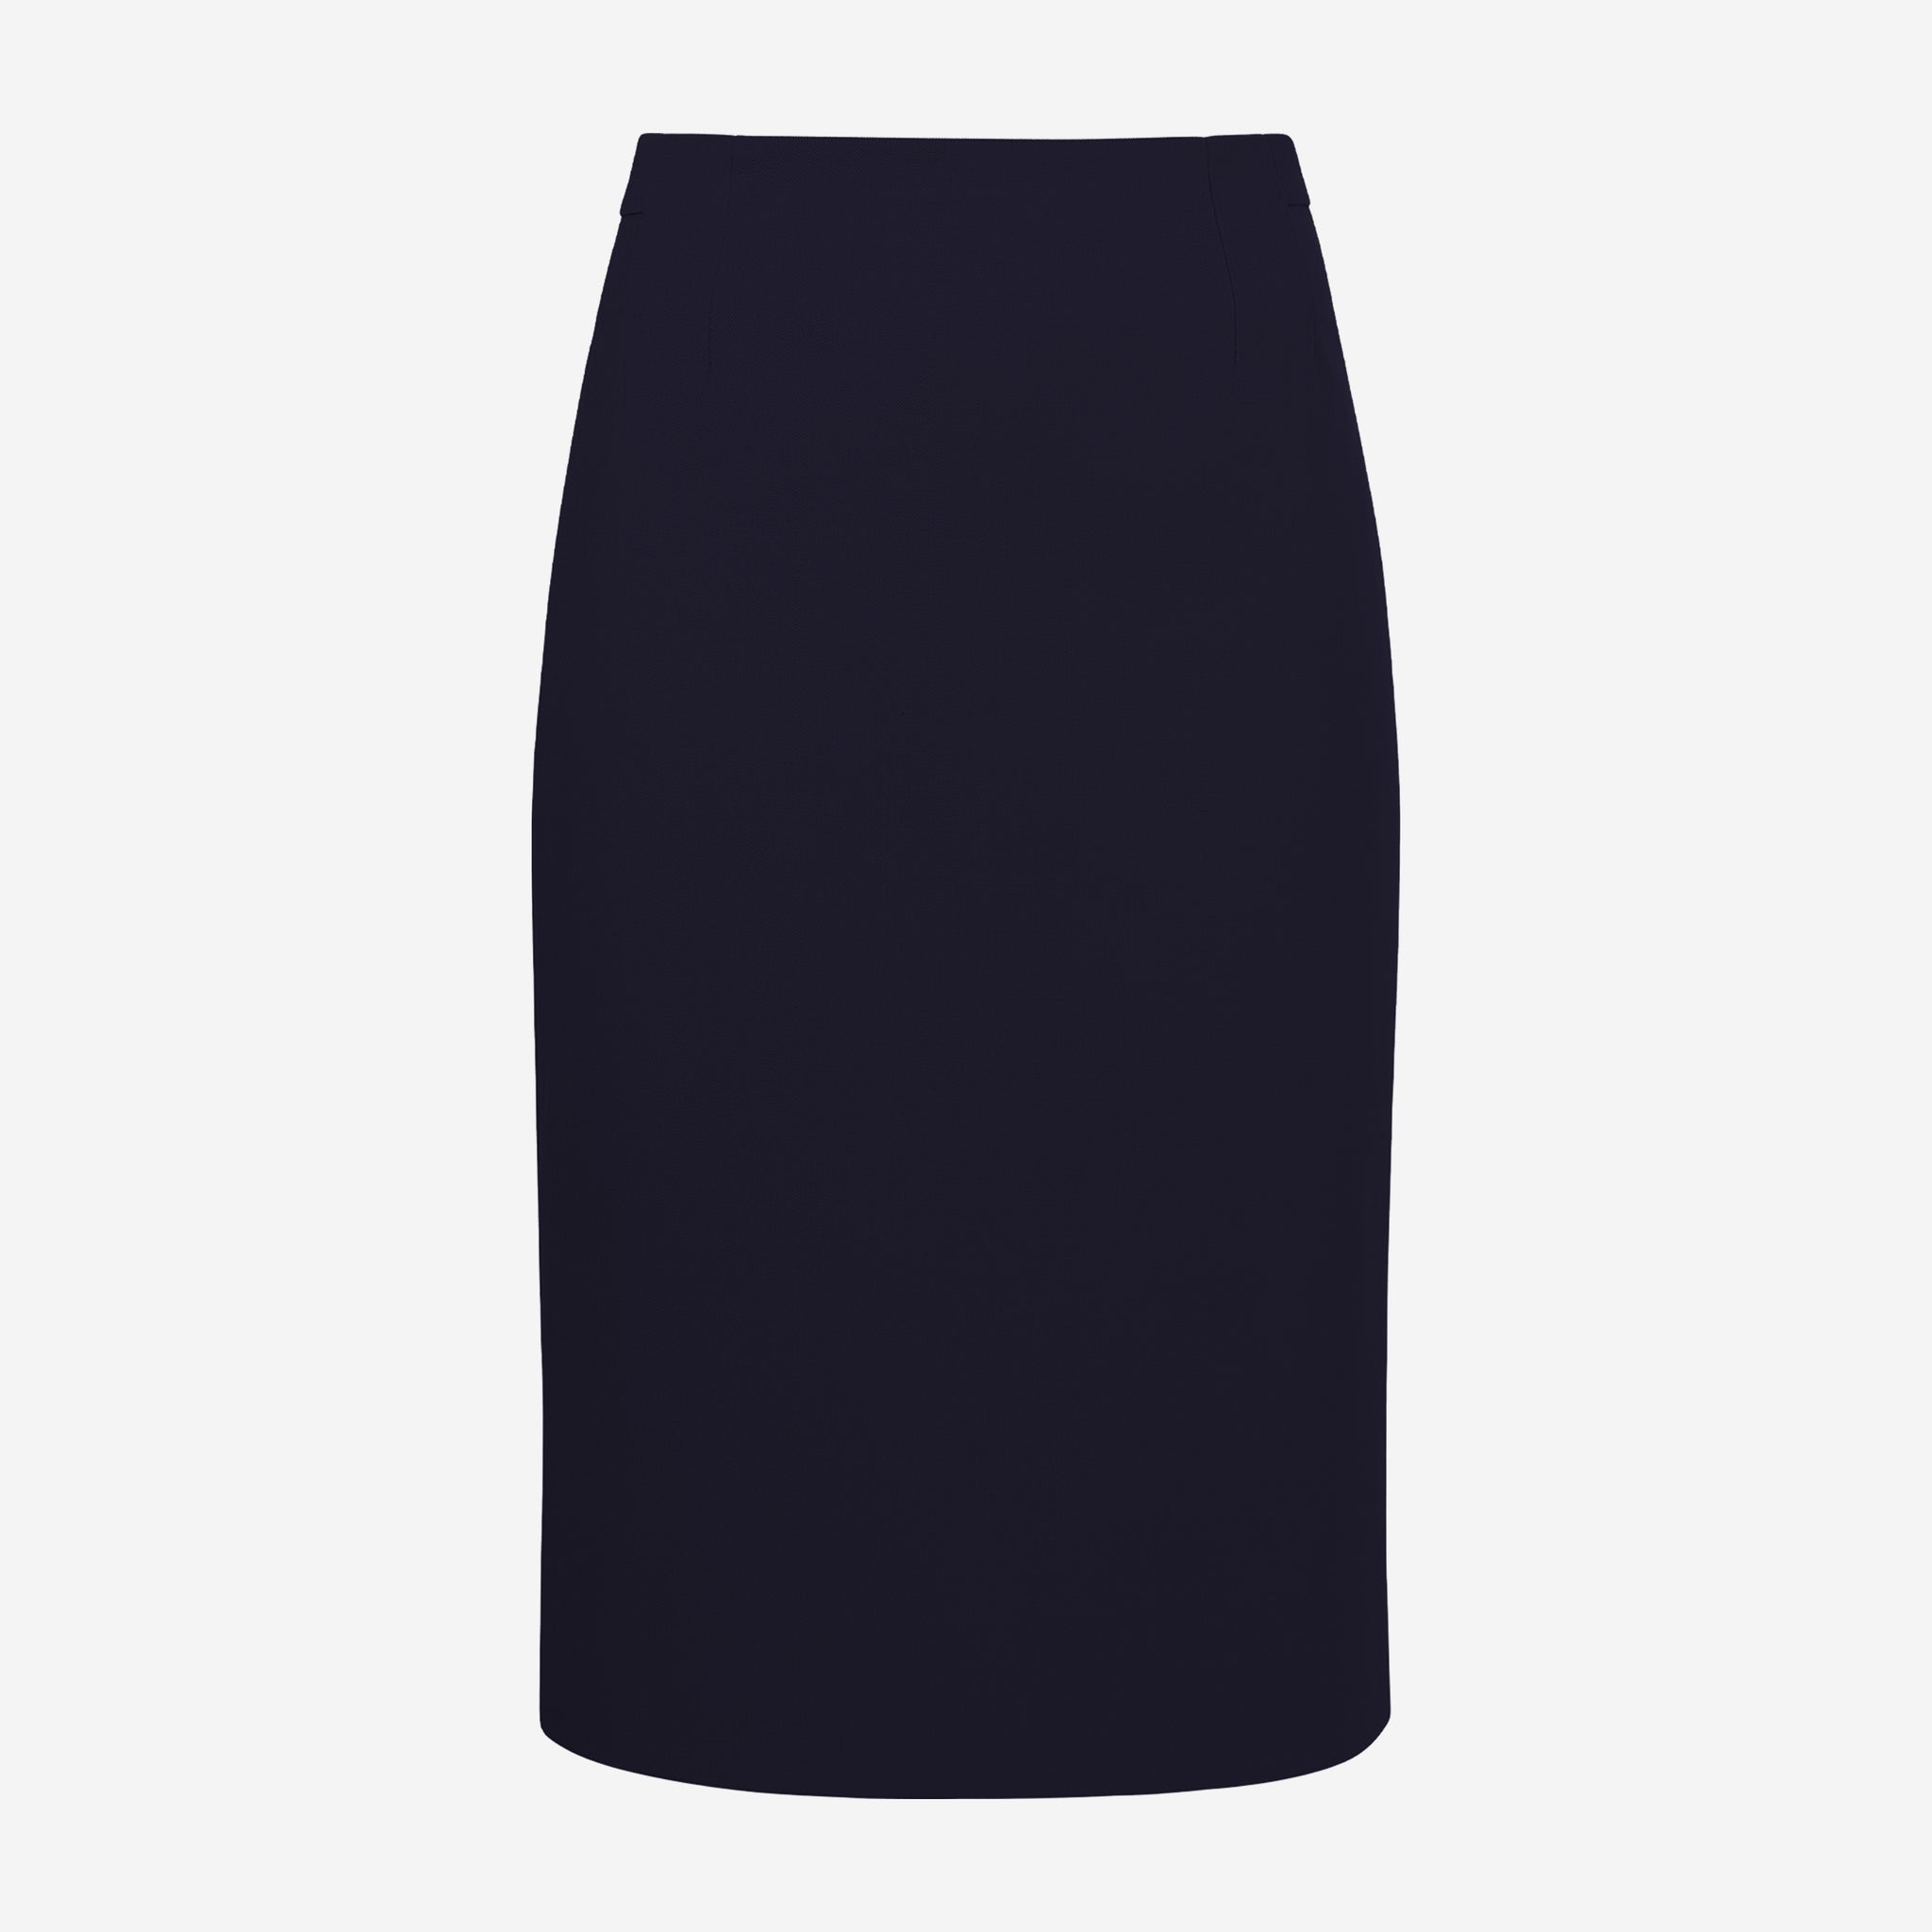 still image of the cobble hill skirt in galaxy blue